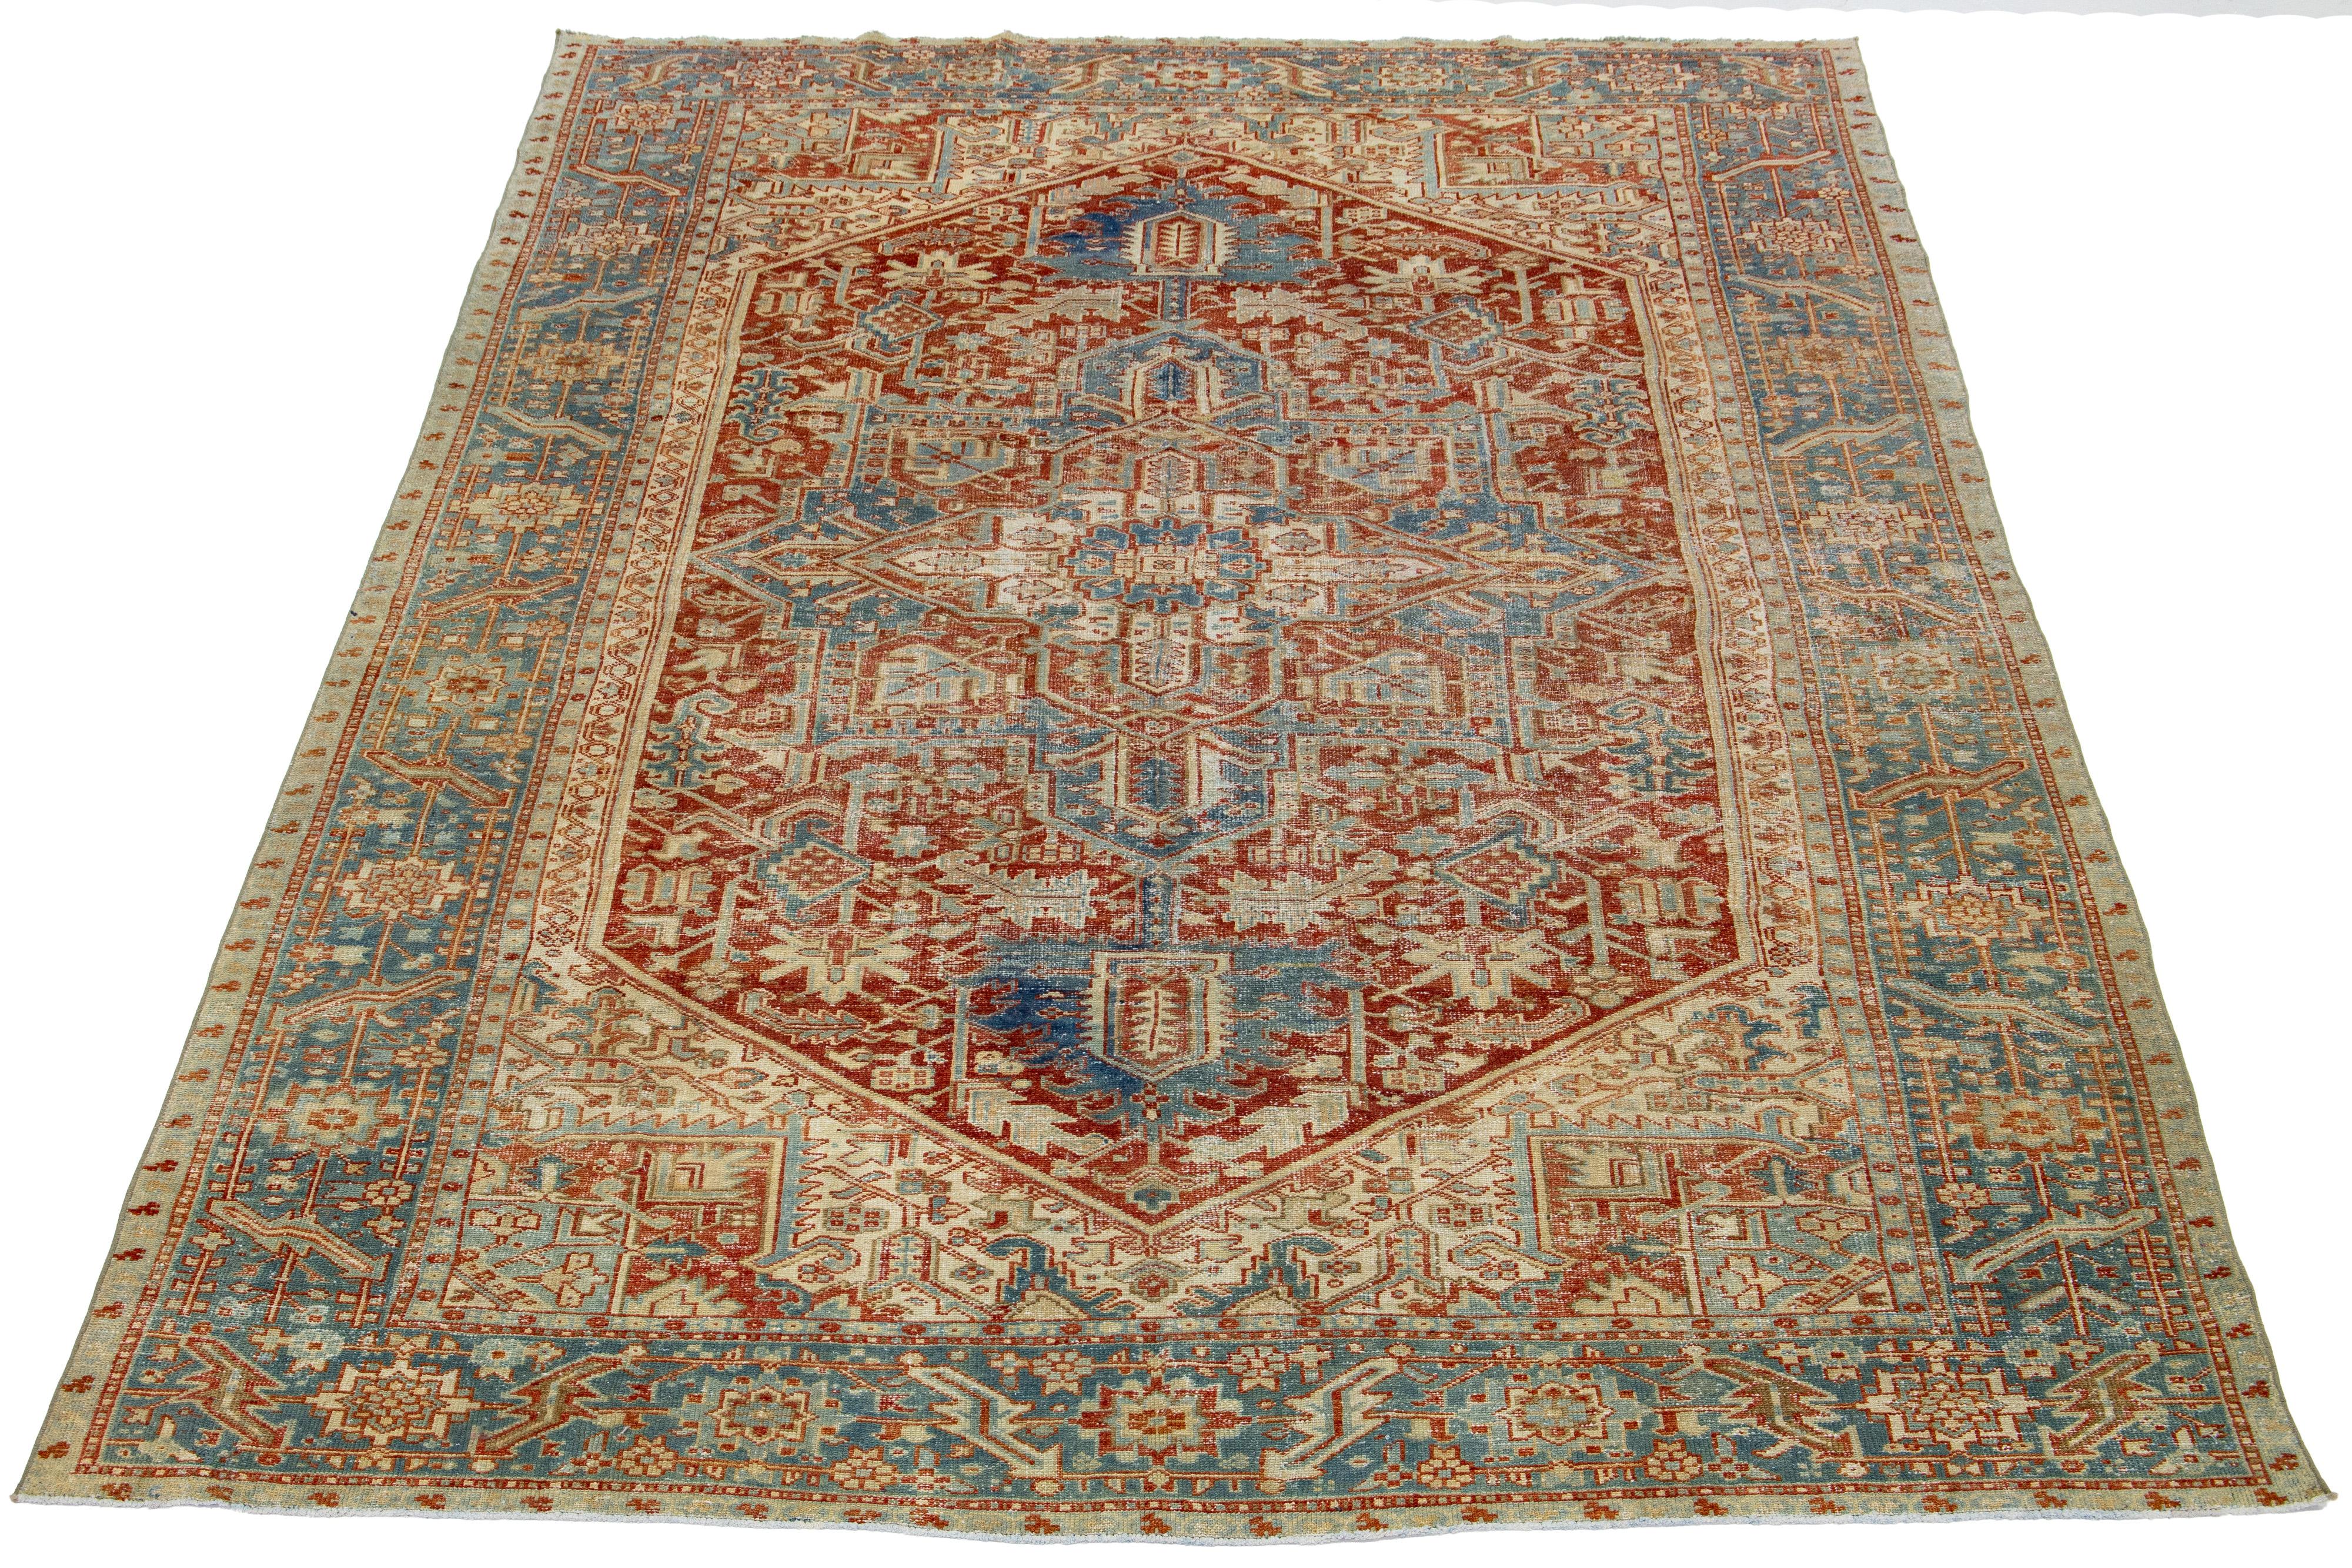 This hand-knotted wool Persian Heriz rug showcases a stunning allover pattern in shades of blue, brown, and ivory on a red-rust field.

This rug measures 7'11' x 11'.

Our rugs are professionally cleaned before shipping.